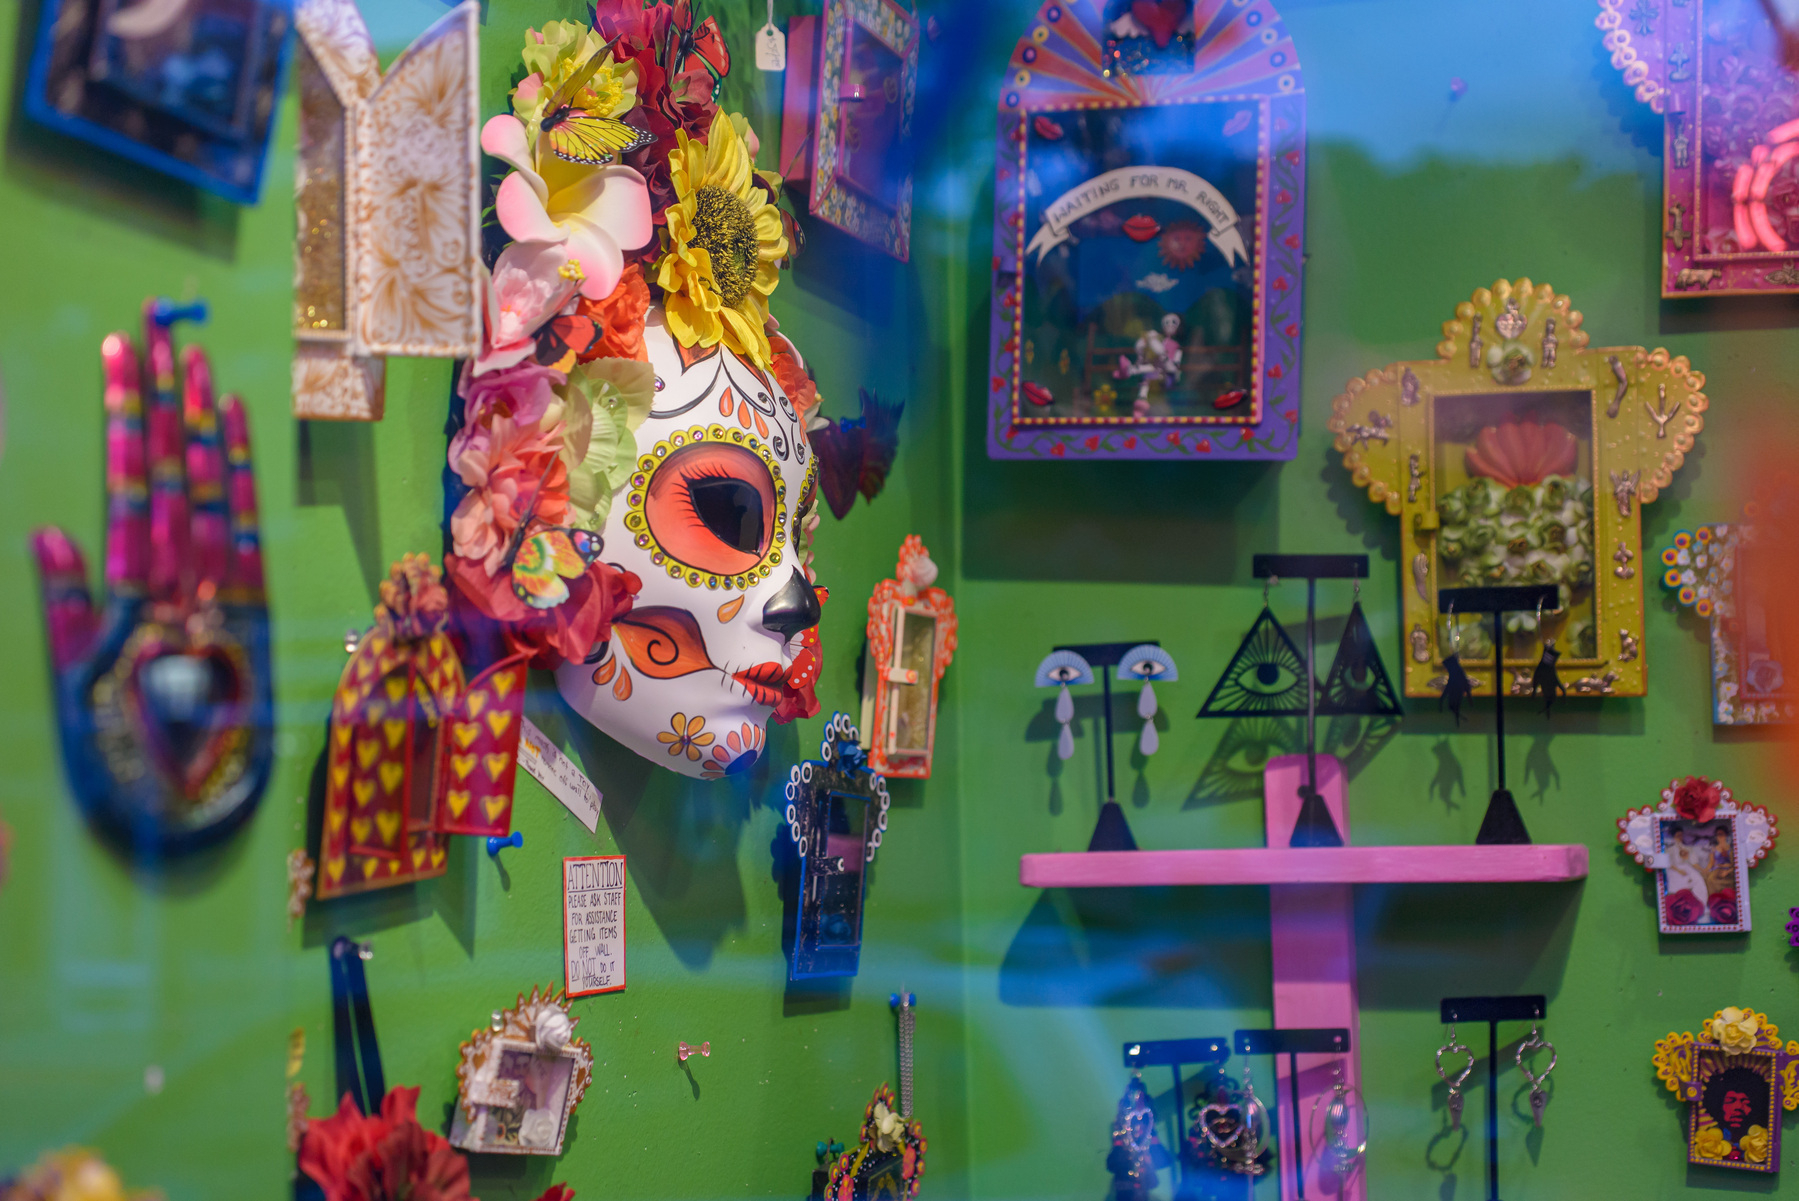 Shop display of various spiritually oriented objects including a feminine folk mask on the left which is the main focus of the image.